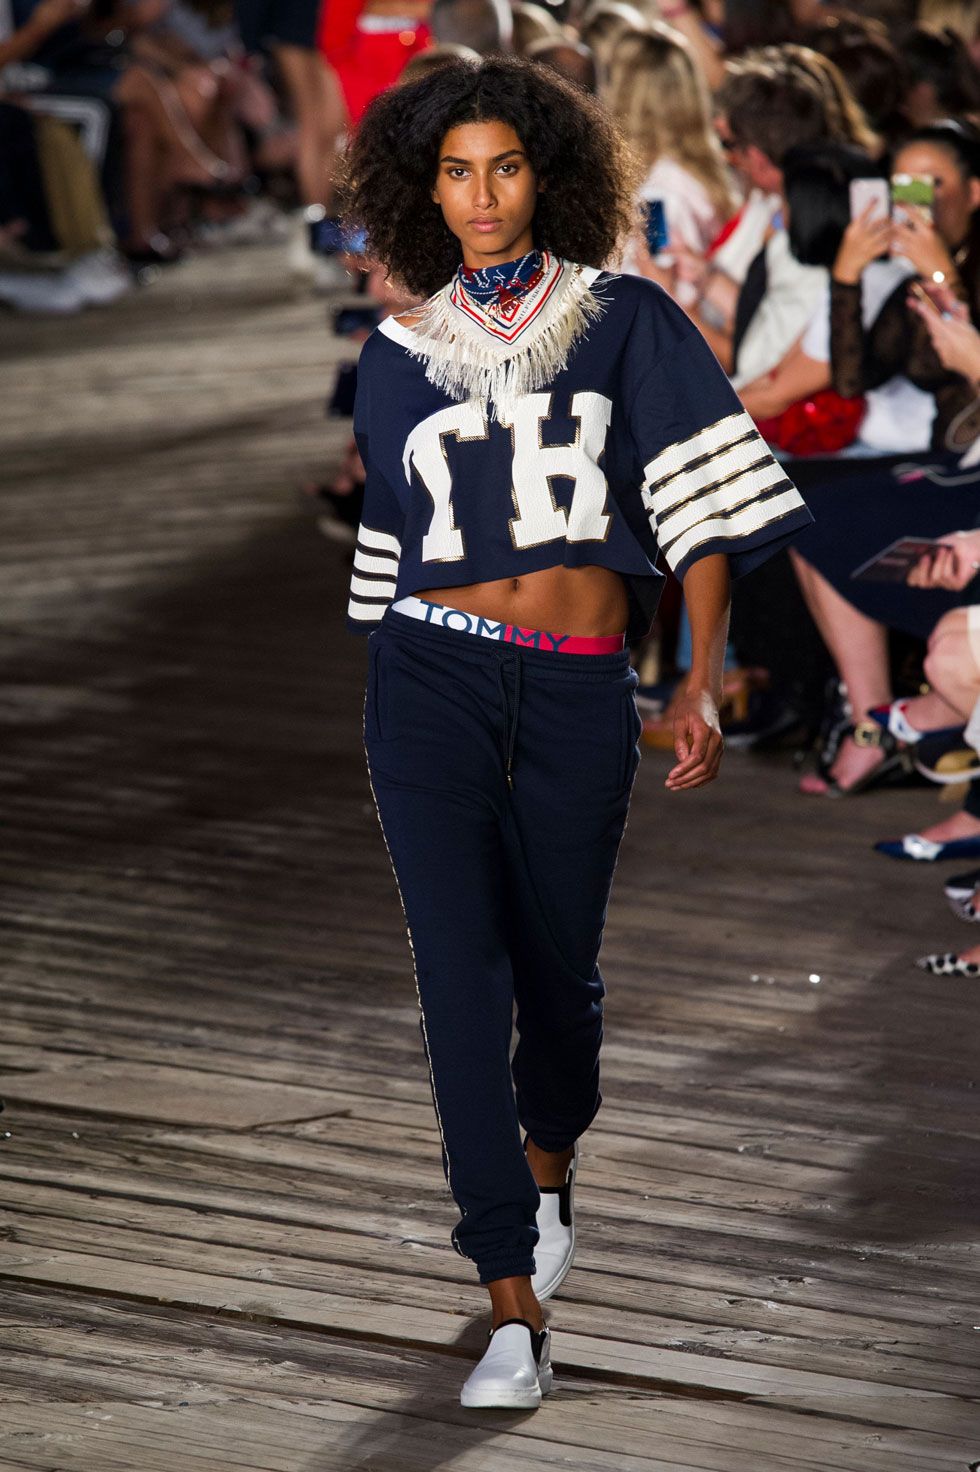 helling opbouwen De schuld geven 37 Looks From the Tommy Hilfiger September 2016 Show - Tommy Hilfiger  Runway Show at New York Fashion Week